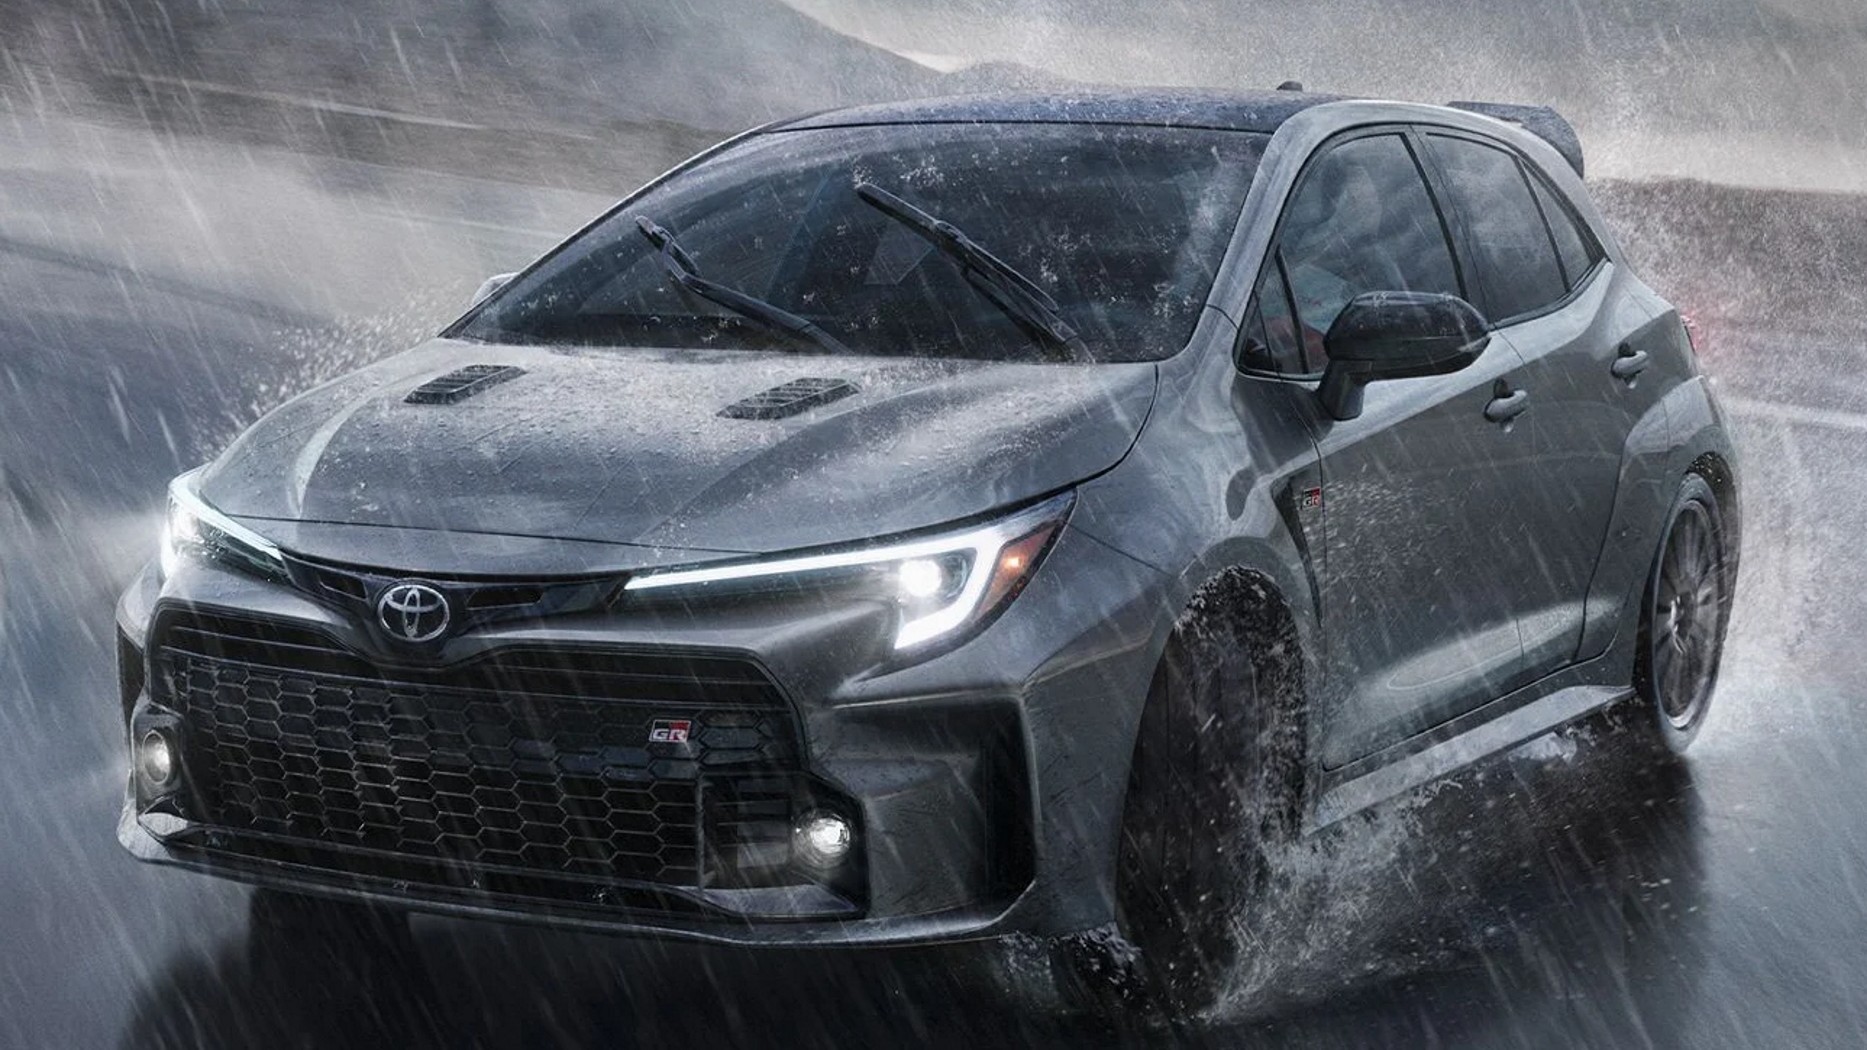 toyota gr corolla leaks and reveals same engine as the gr yaris with three tailpipes 1